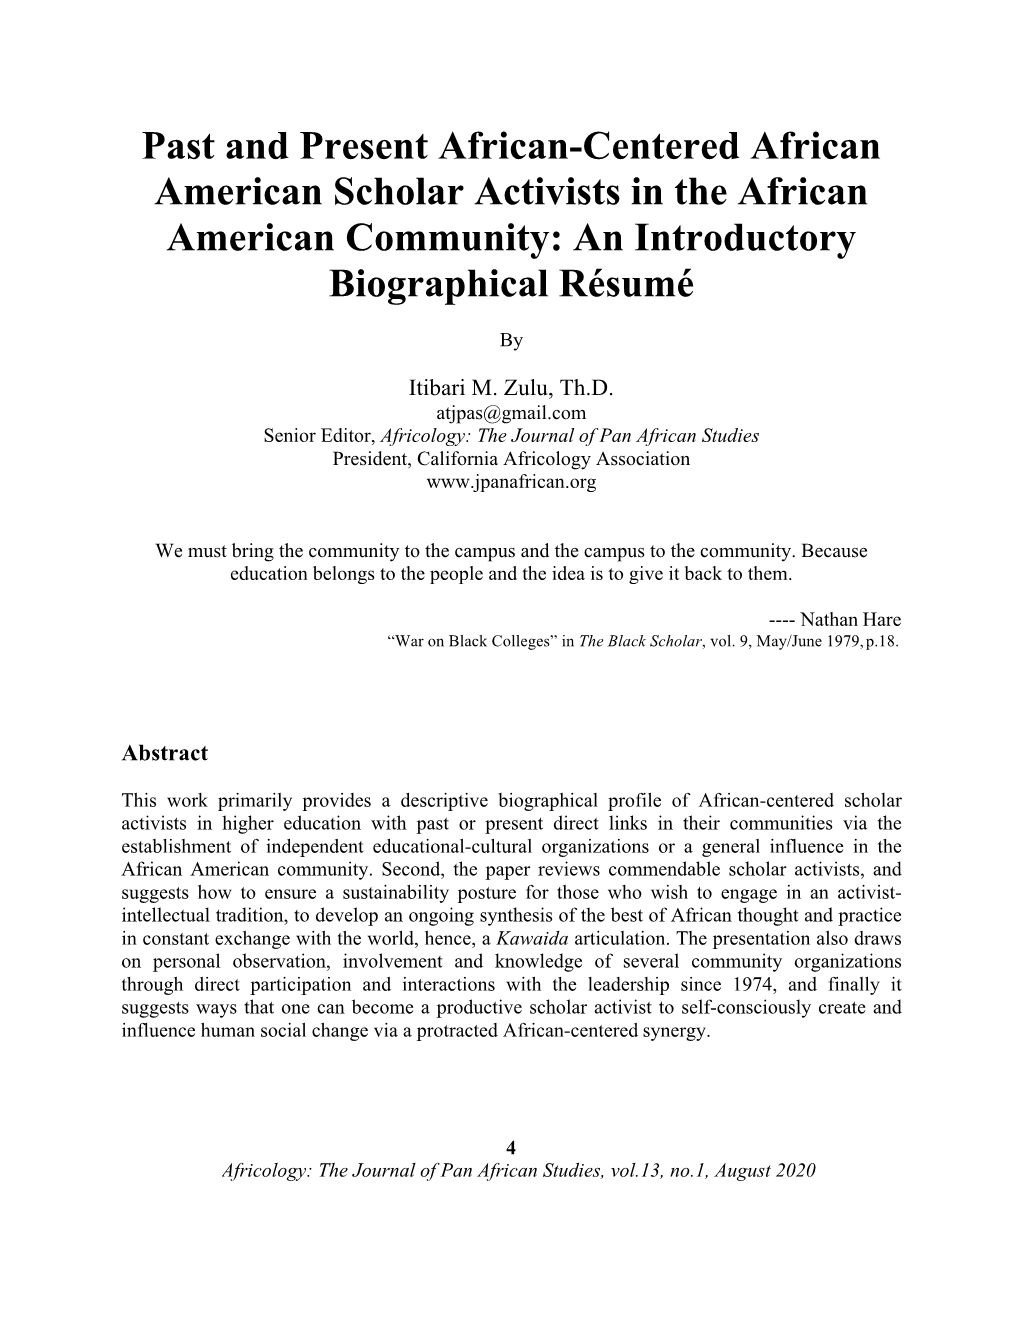 Past and Present African-Centered African American Scholar Activists in the African American Community: an Introductory Biographical Résumé